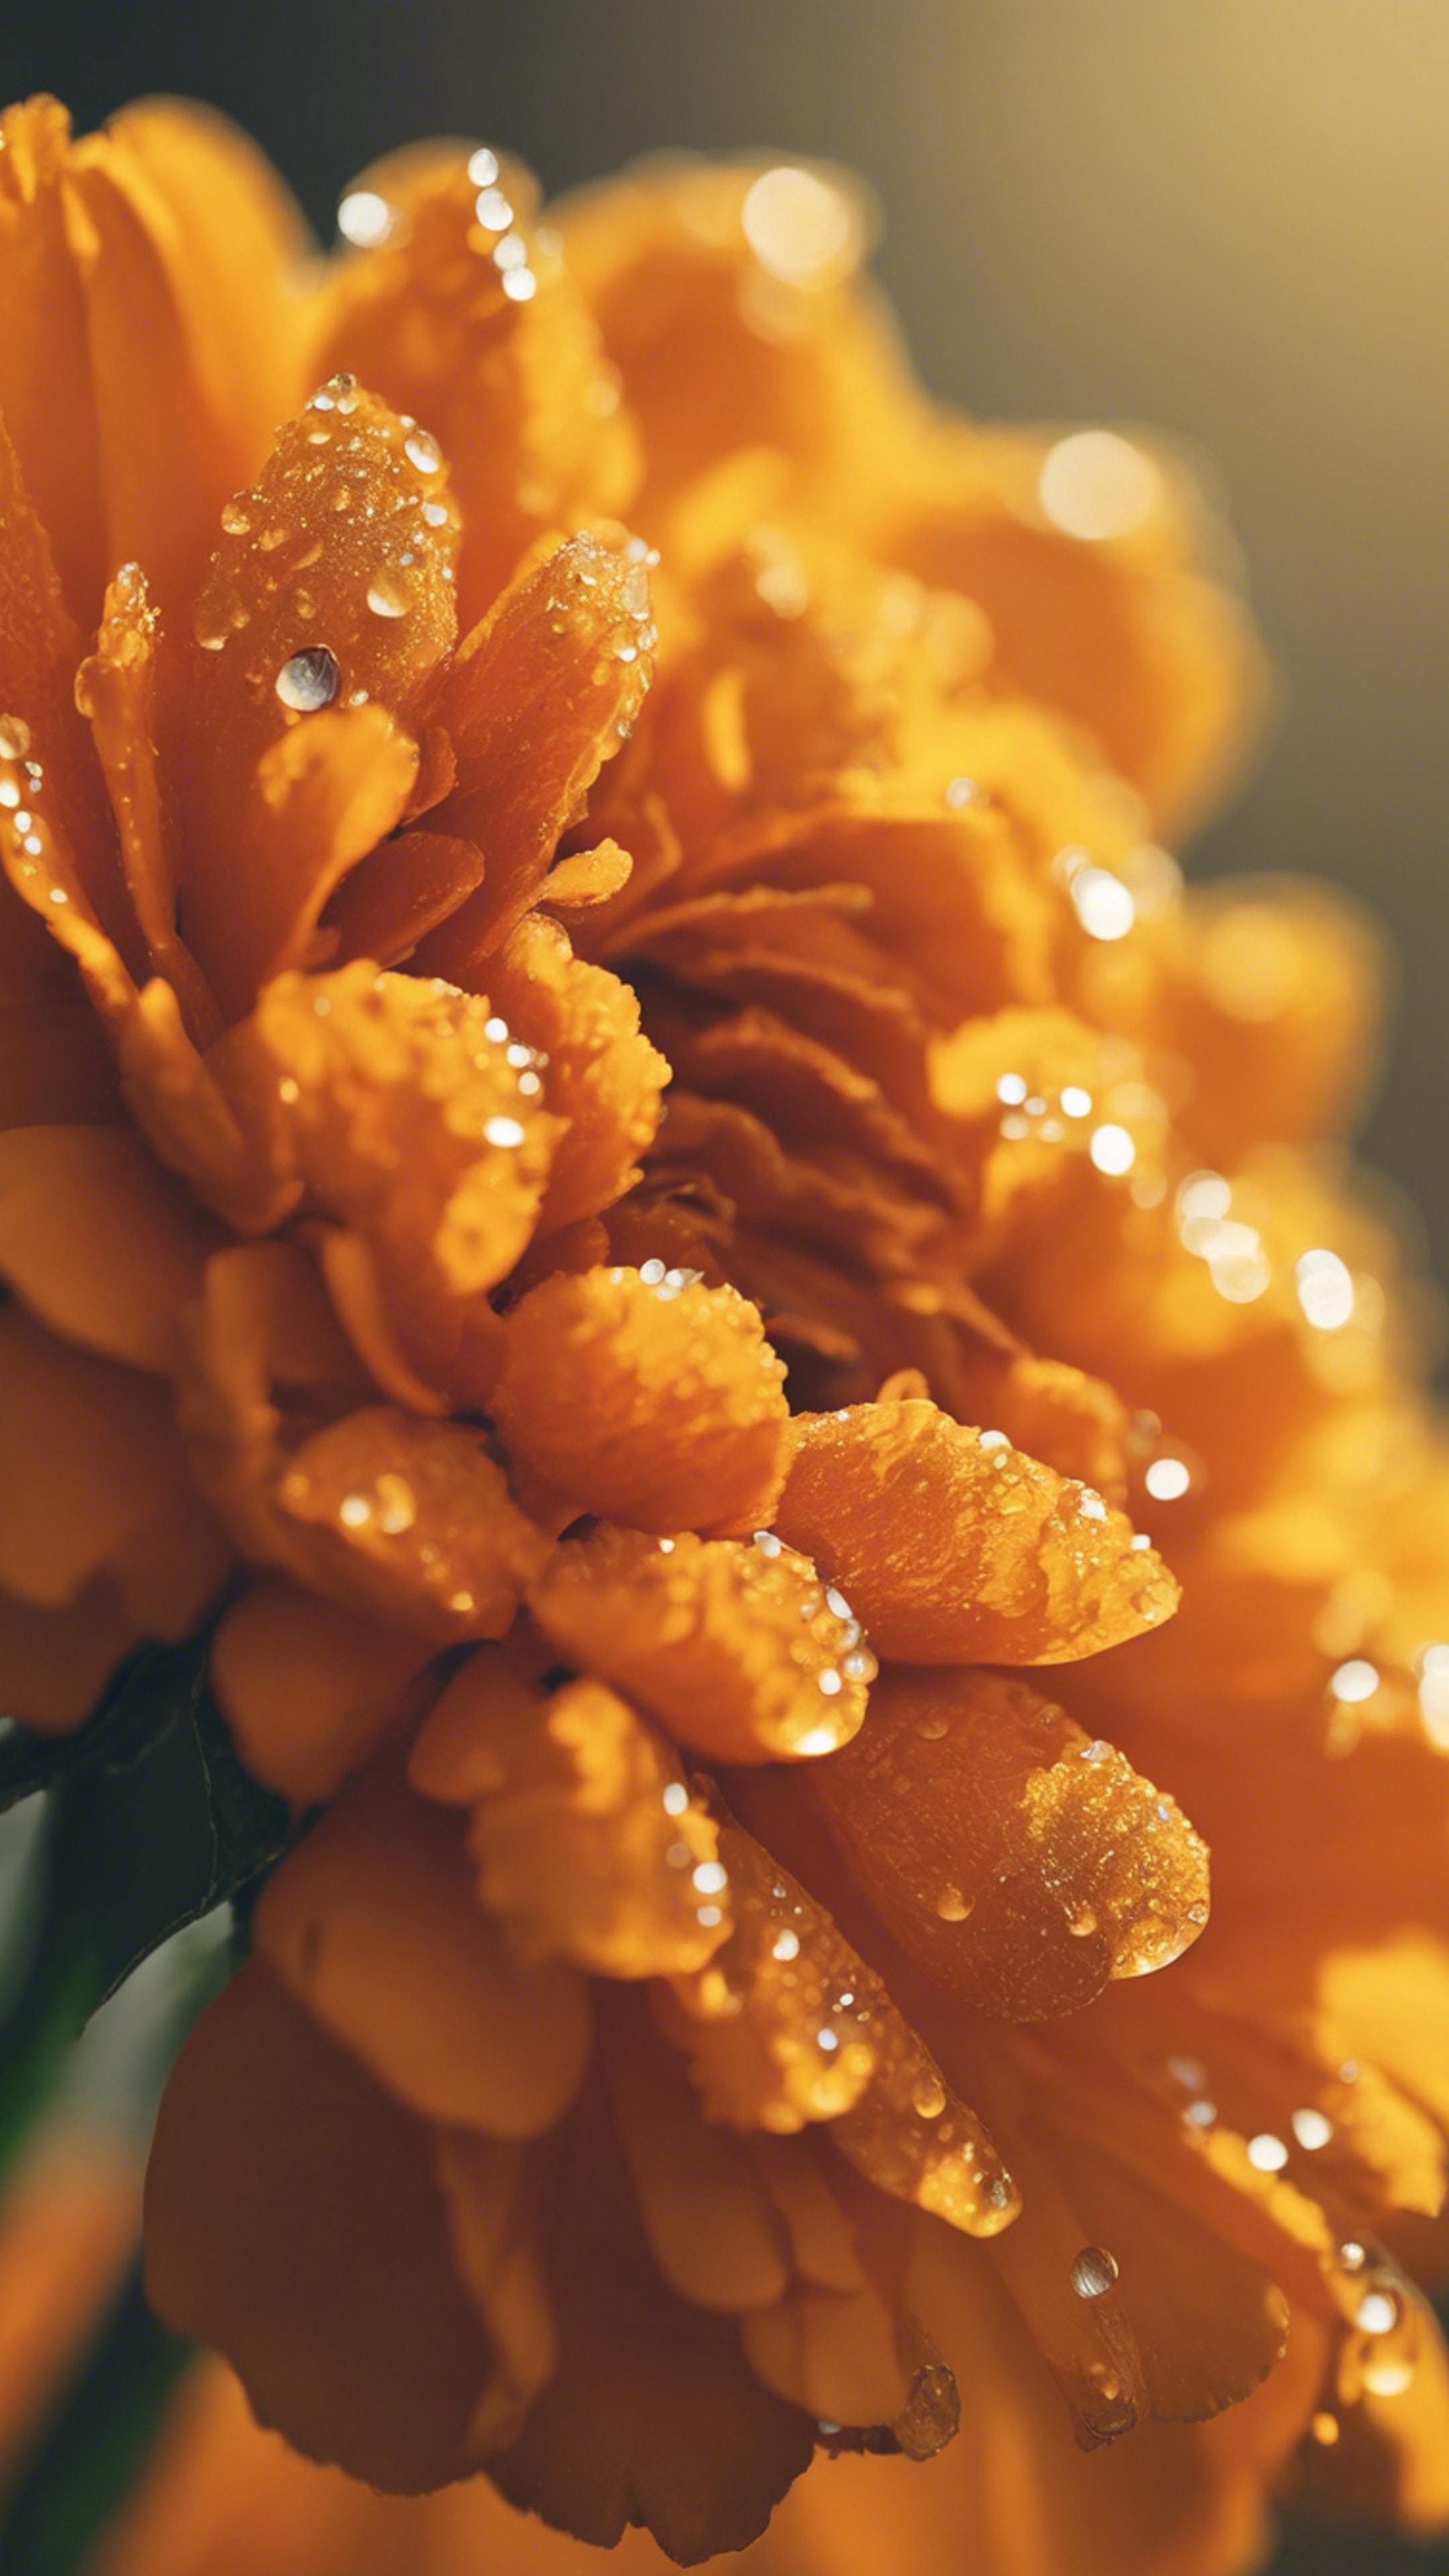 A close-up of an orange marigold with drops of morning dew shimmering on it, set against a calm yellowish background. Wallpaper[e9f9e17546d94298a326]